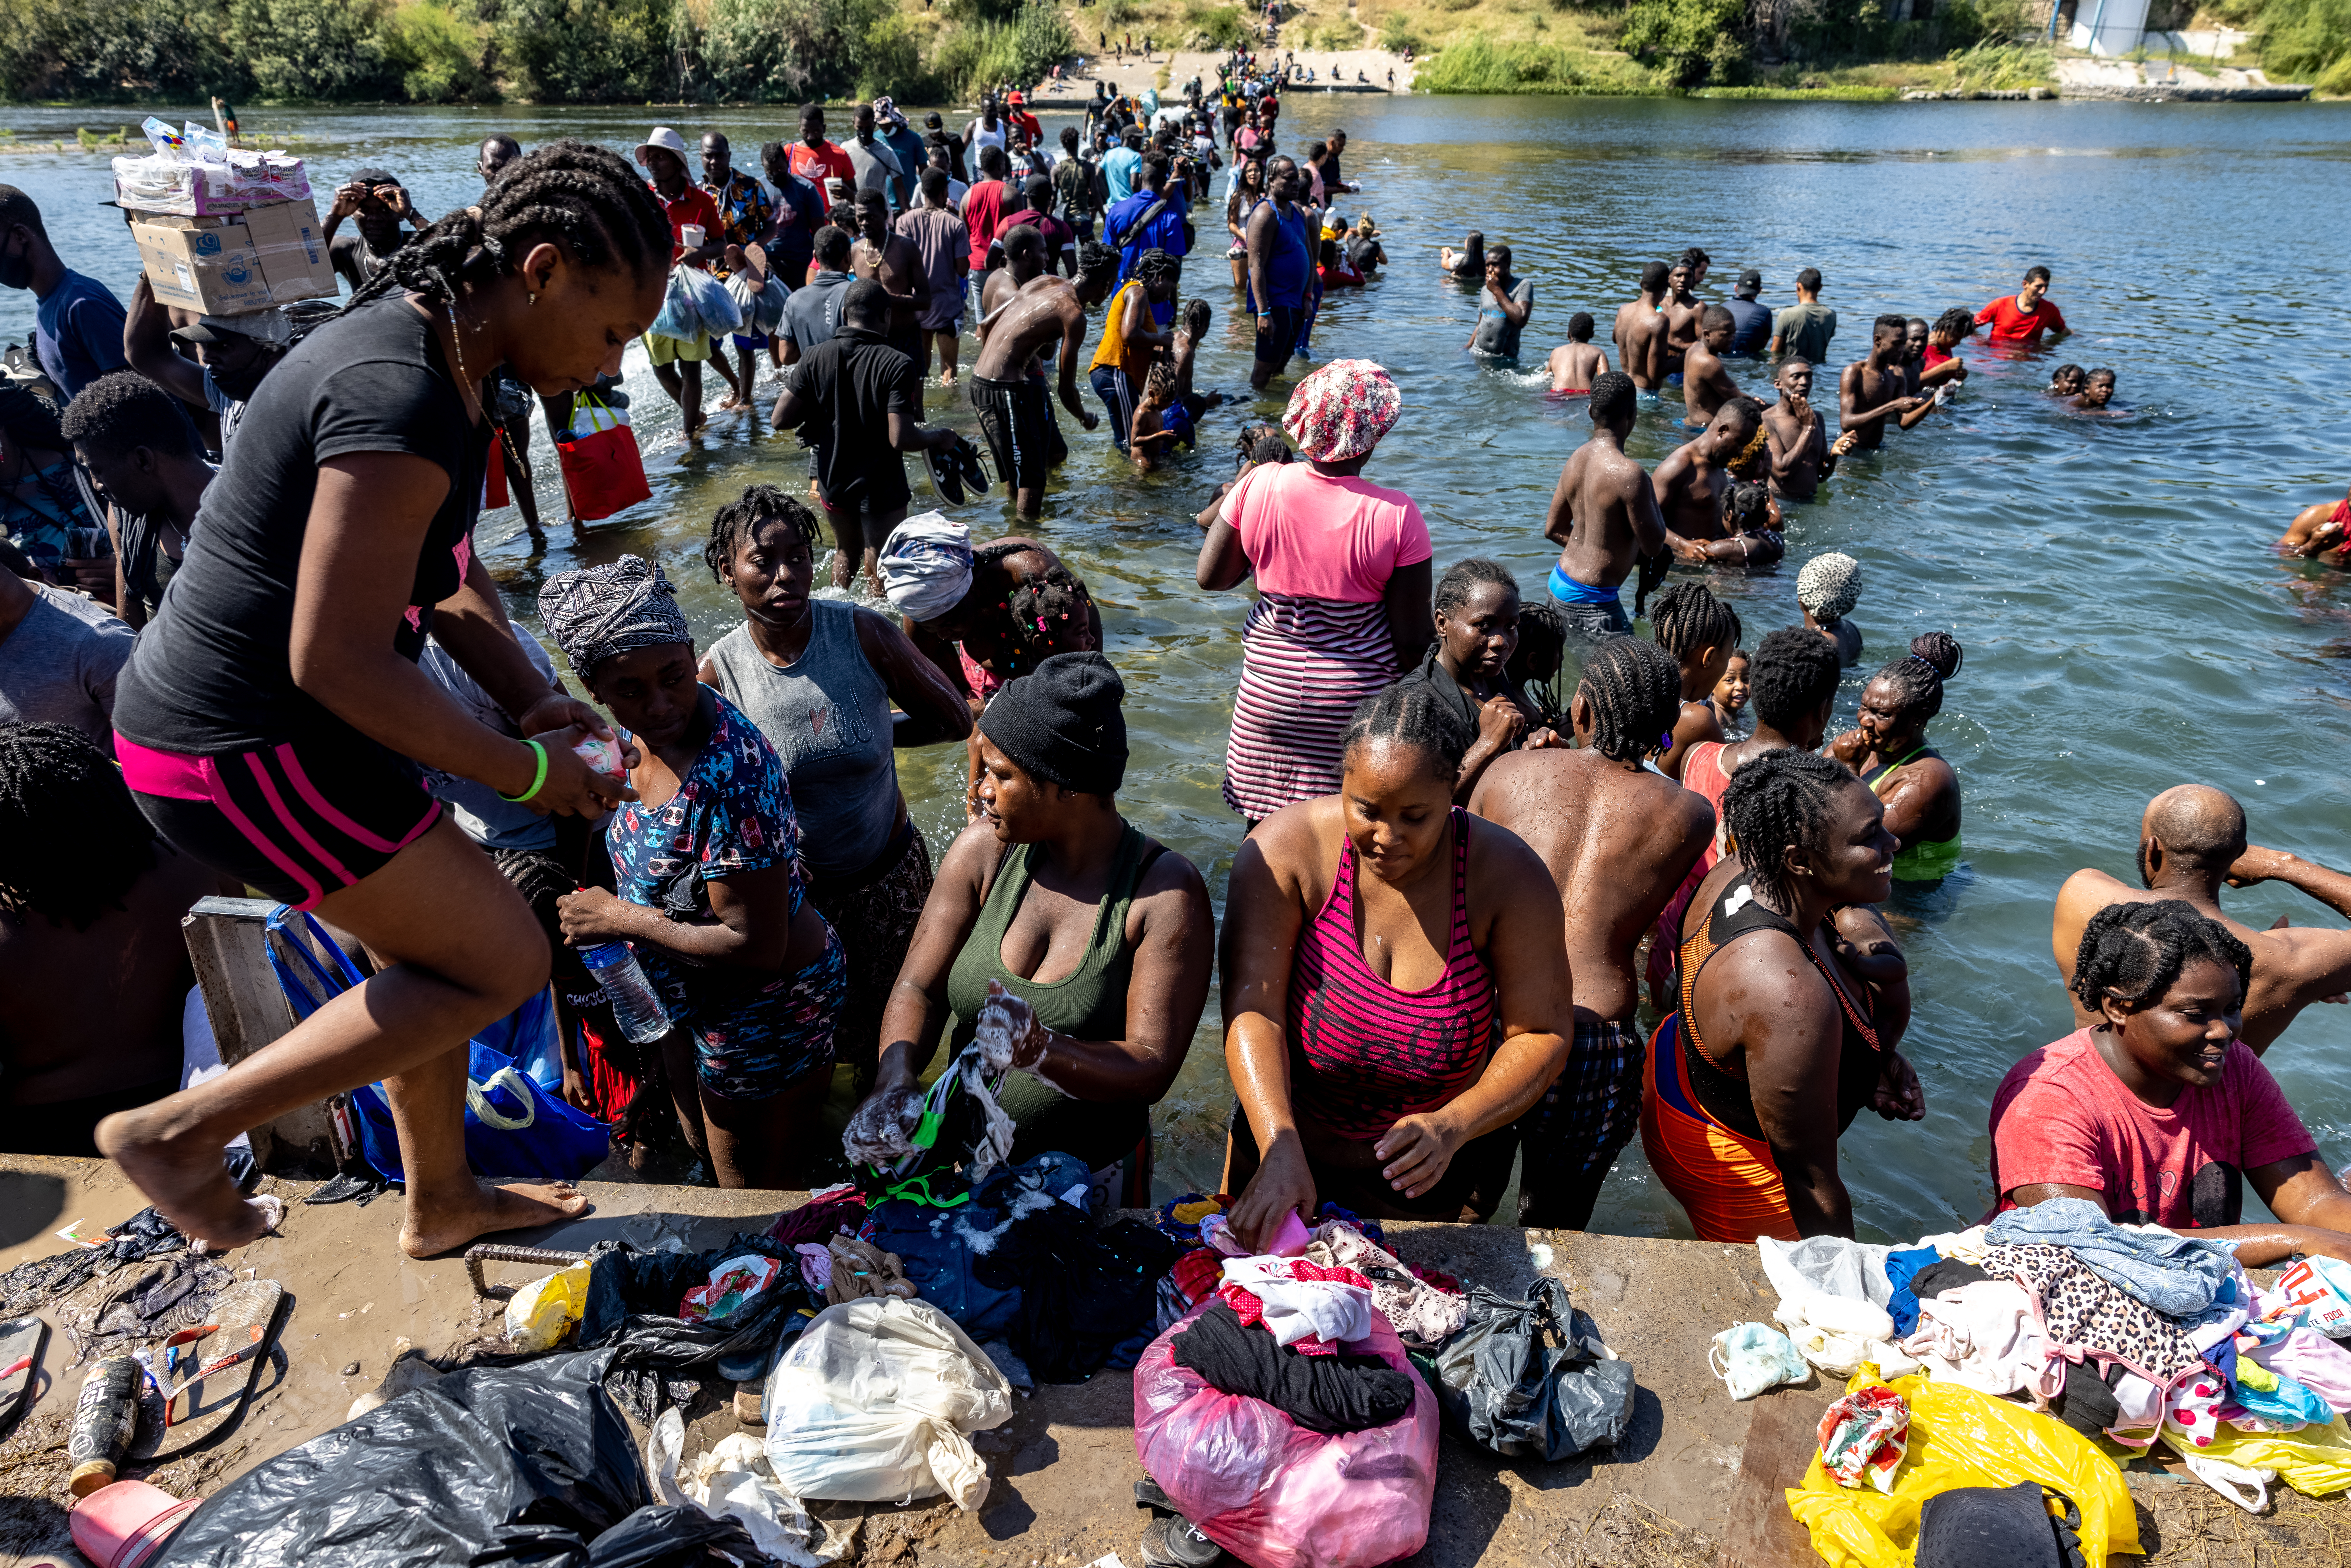 Migrants wash their clothes in the Rio Grande River near a makeshift encampment under the International Bridge between Del Rio, TX and Acuña, MX on September 17, 2021 in Del Rio, Texas. (Photo by Jordan Vonderhaar/Getty Images)